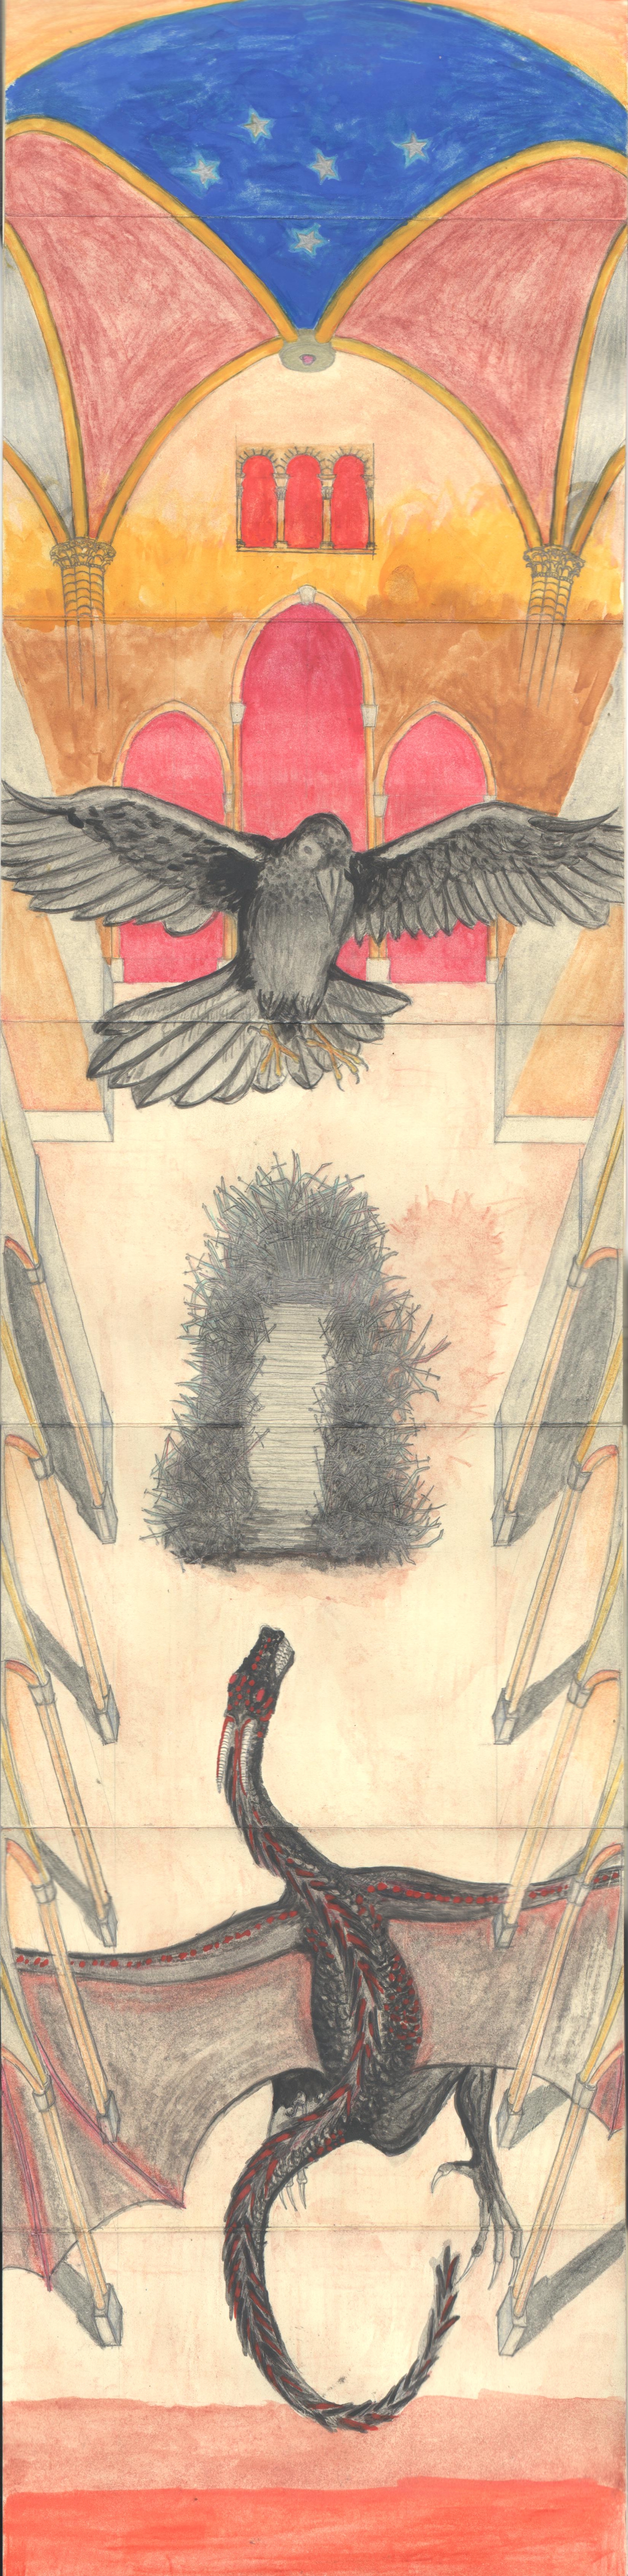 Crow and Dragon descending on the Iron Throne